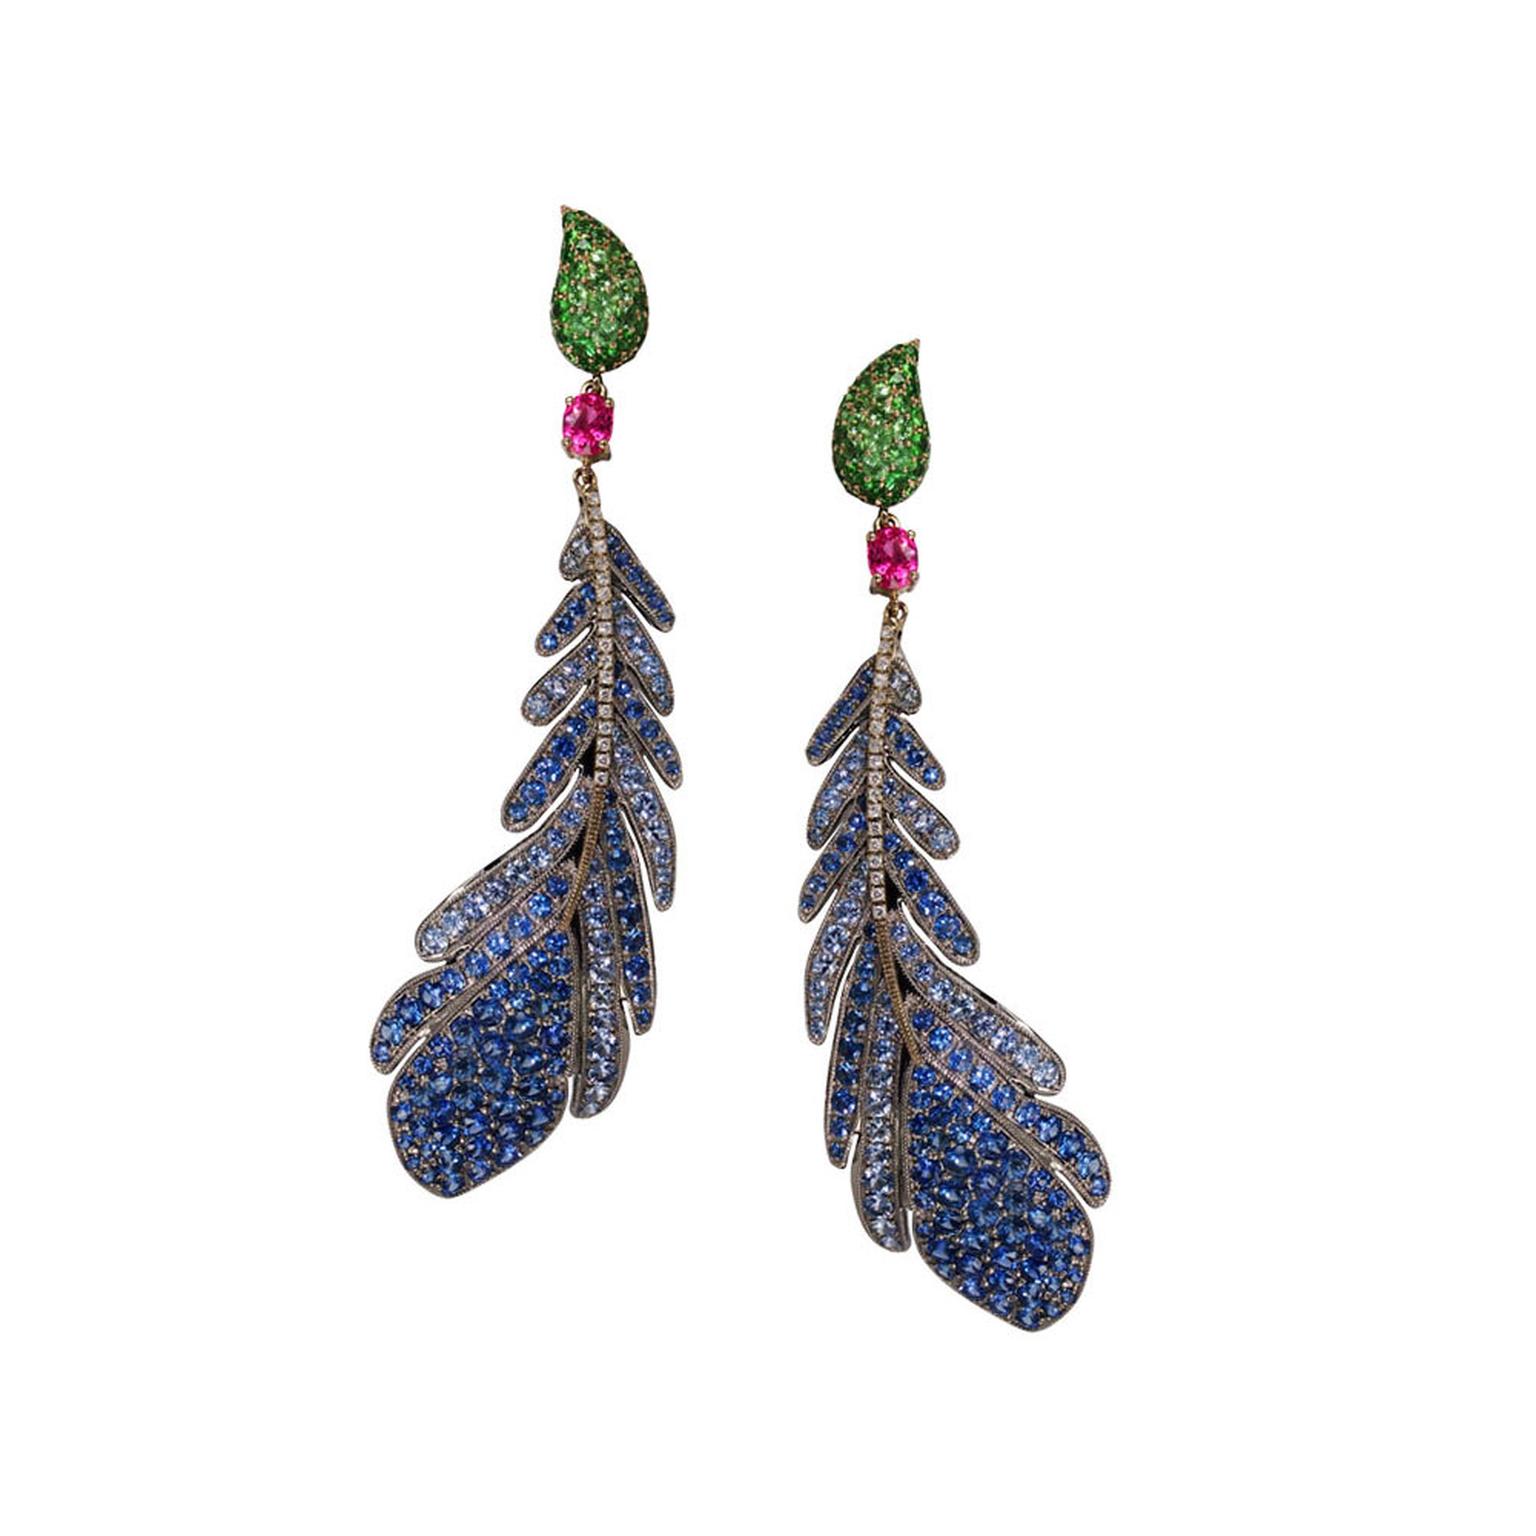 Nisan Ongwuthitham for Plukka blue sapphire and titanium Feather earrings